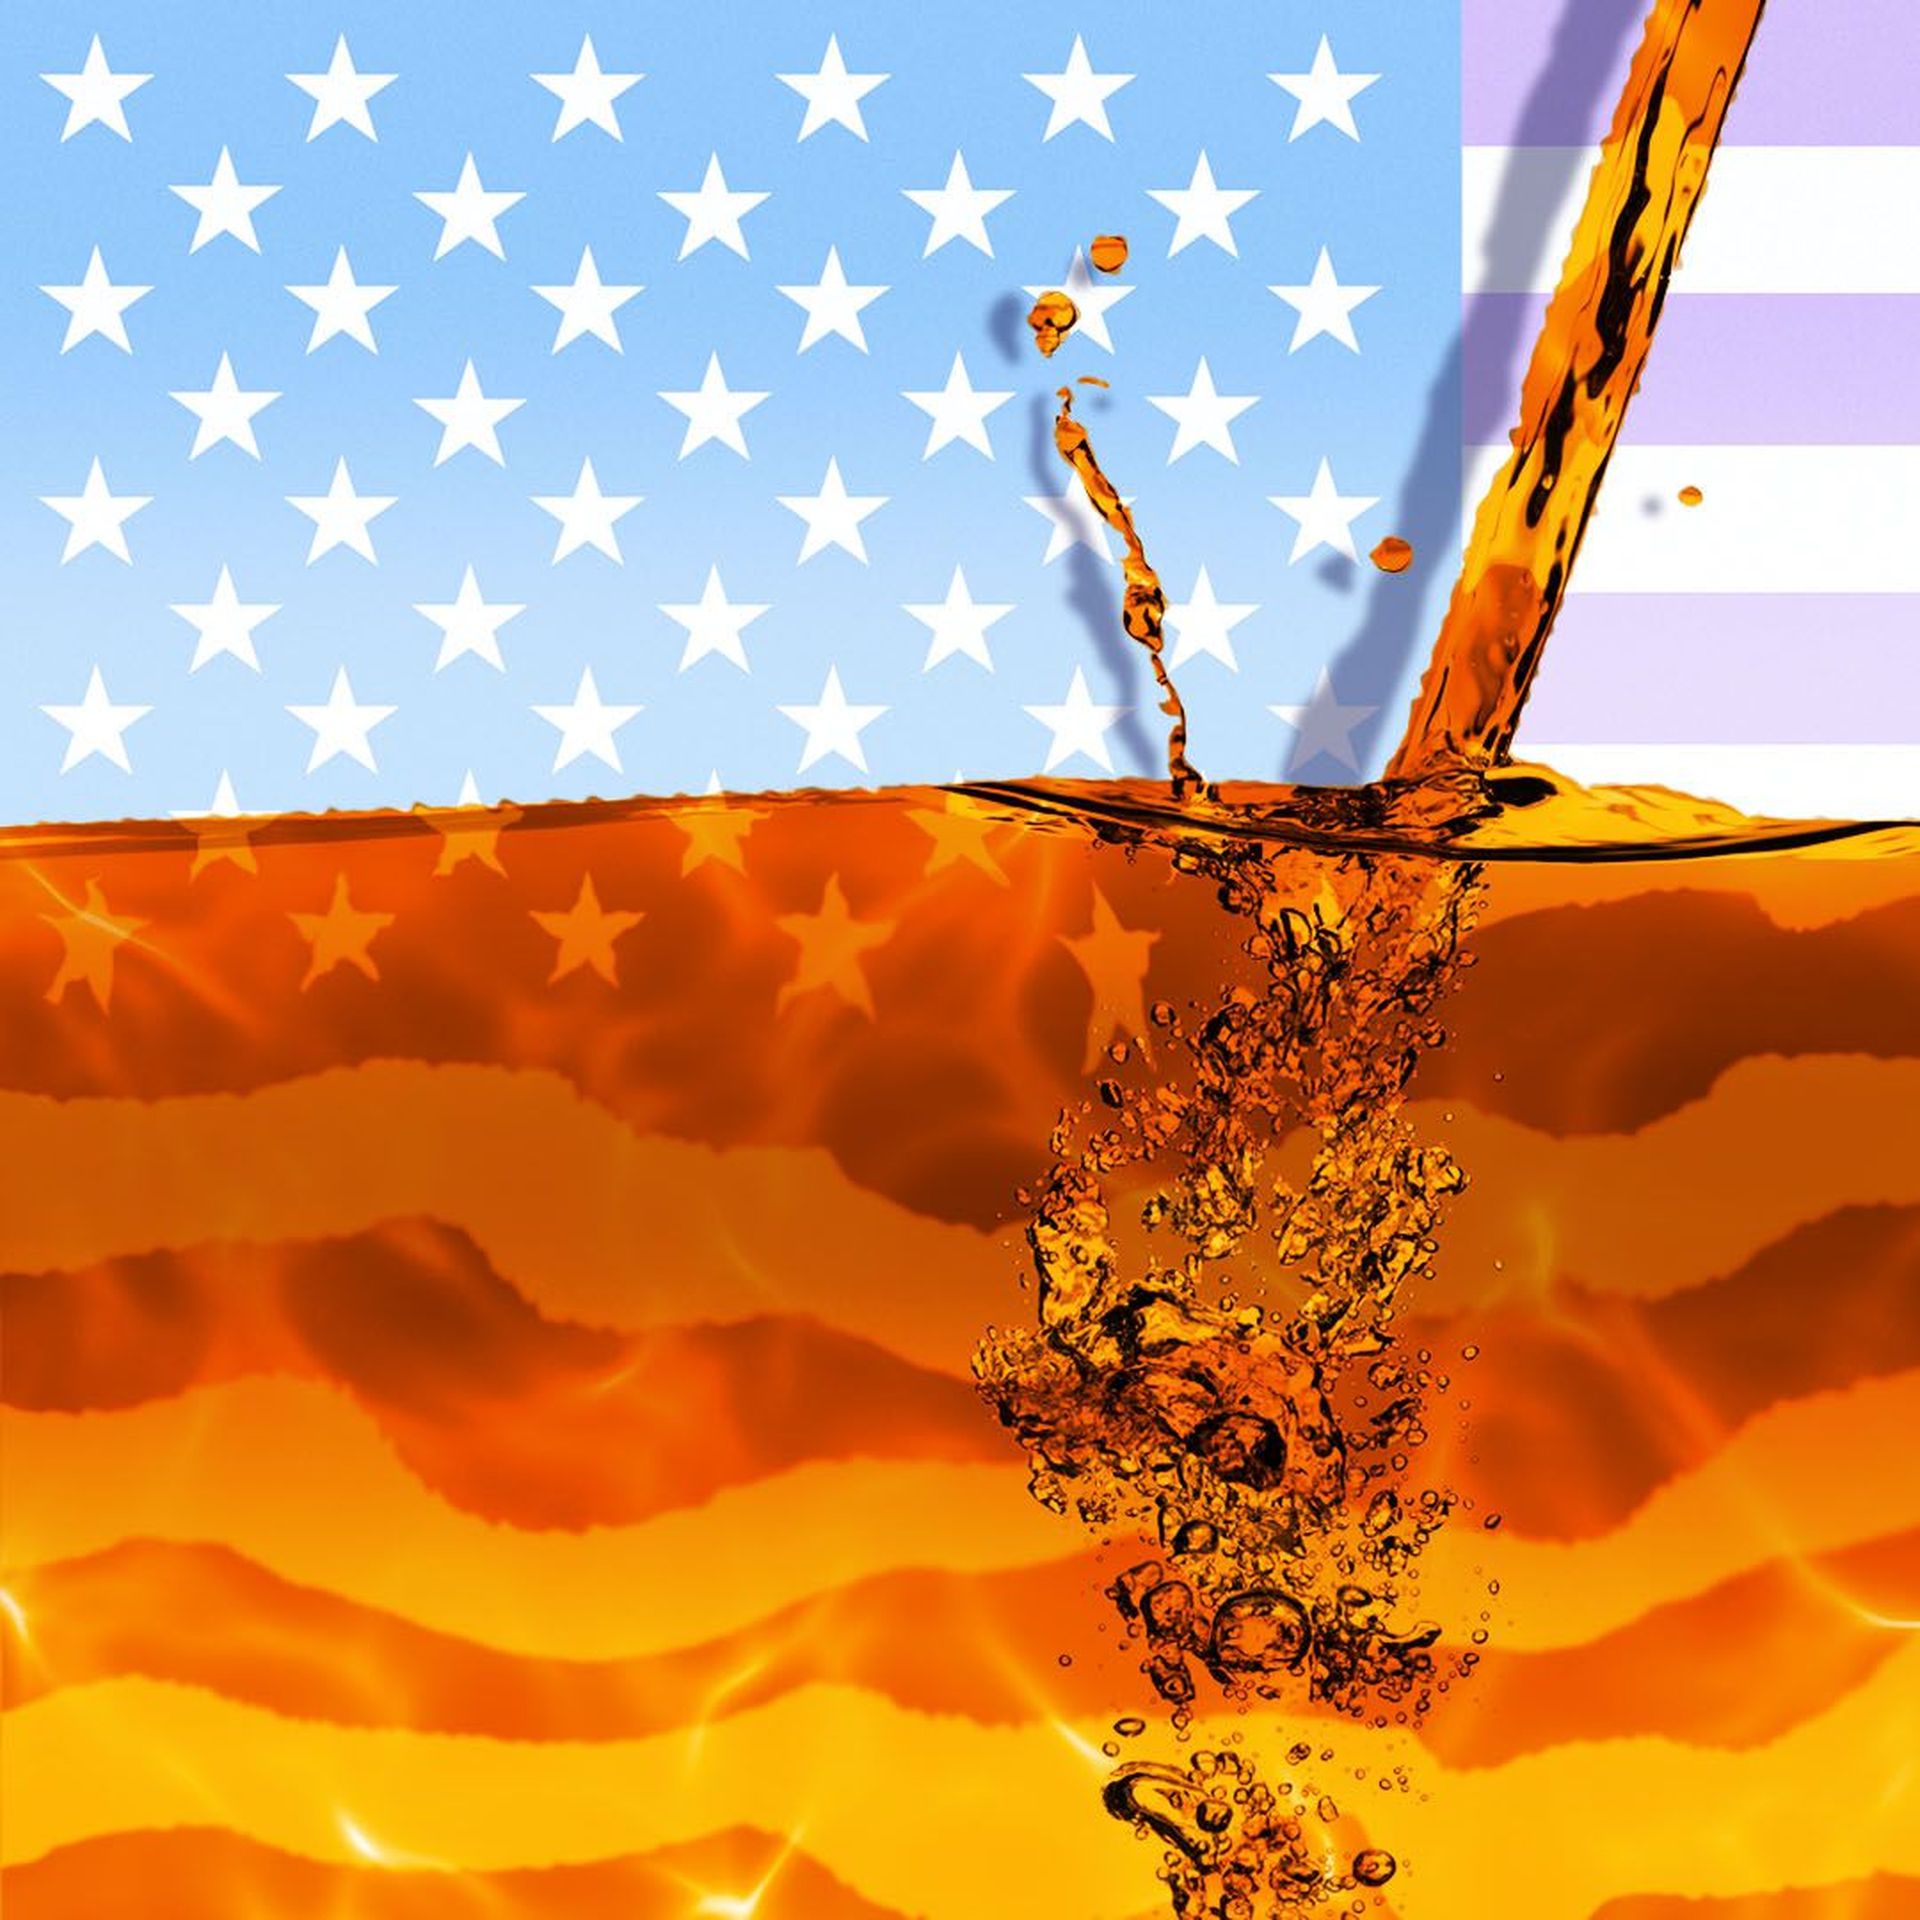 Illustration of alcohol being poured over the U.S. flag